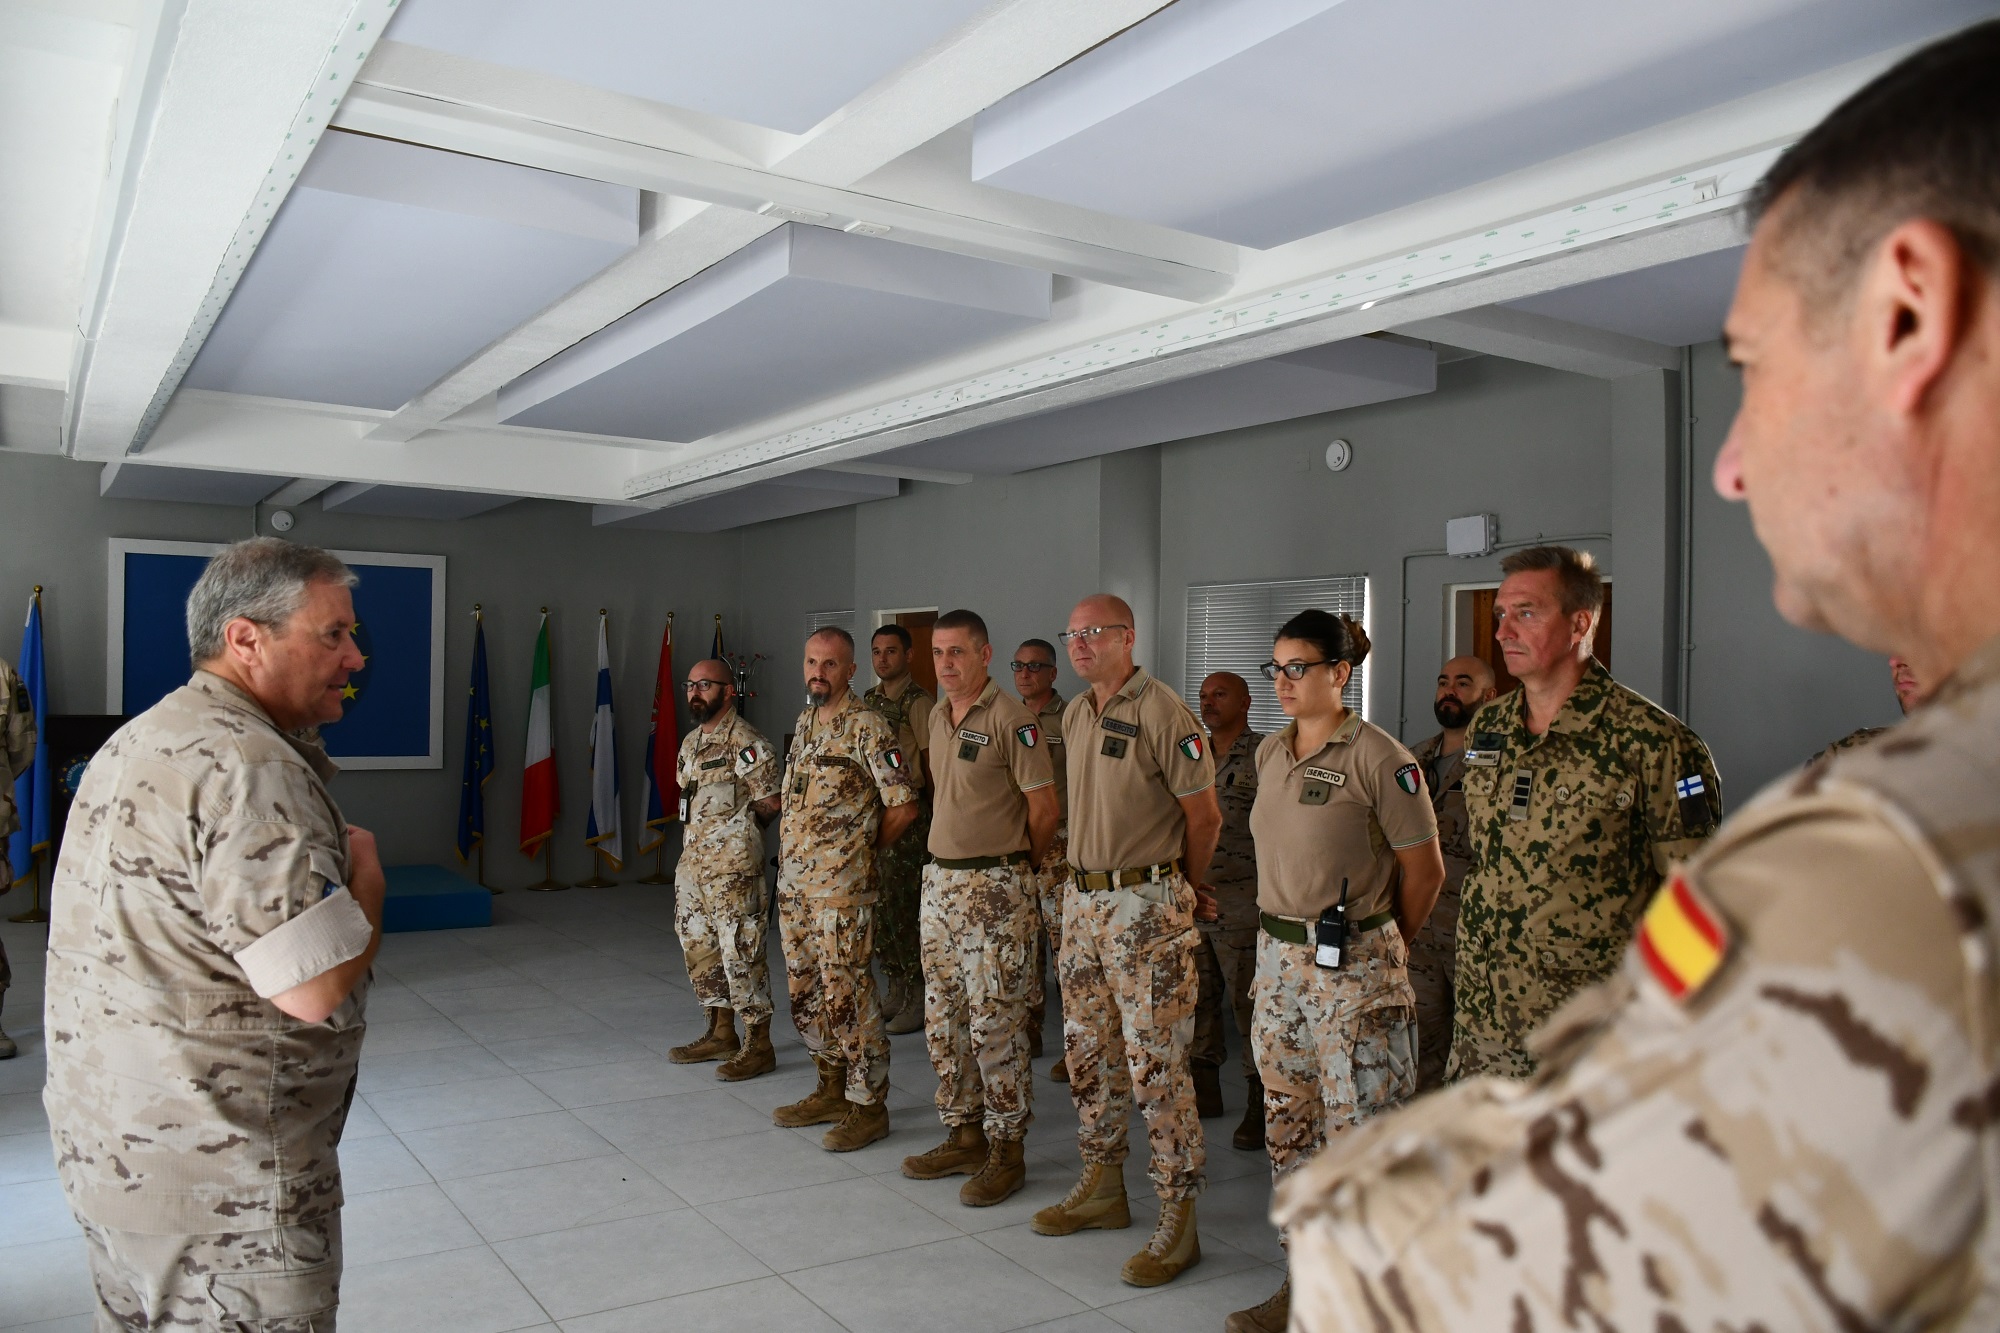 Colonel Garrido during his farewell ceremony